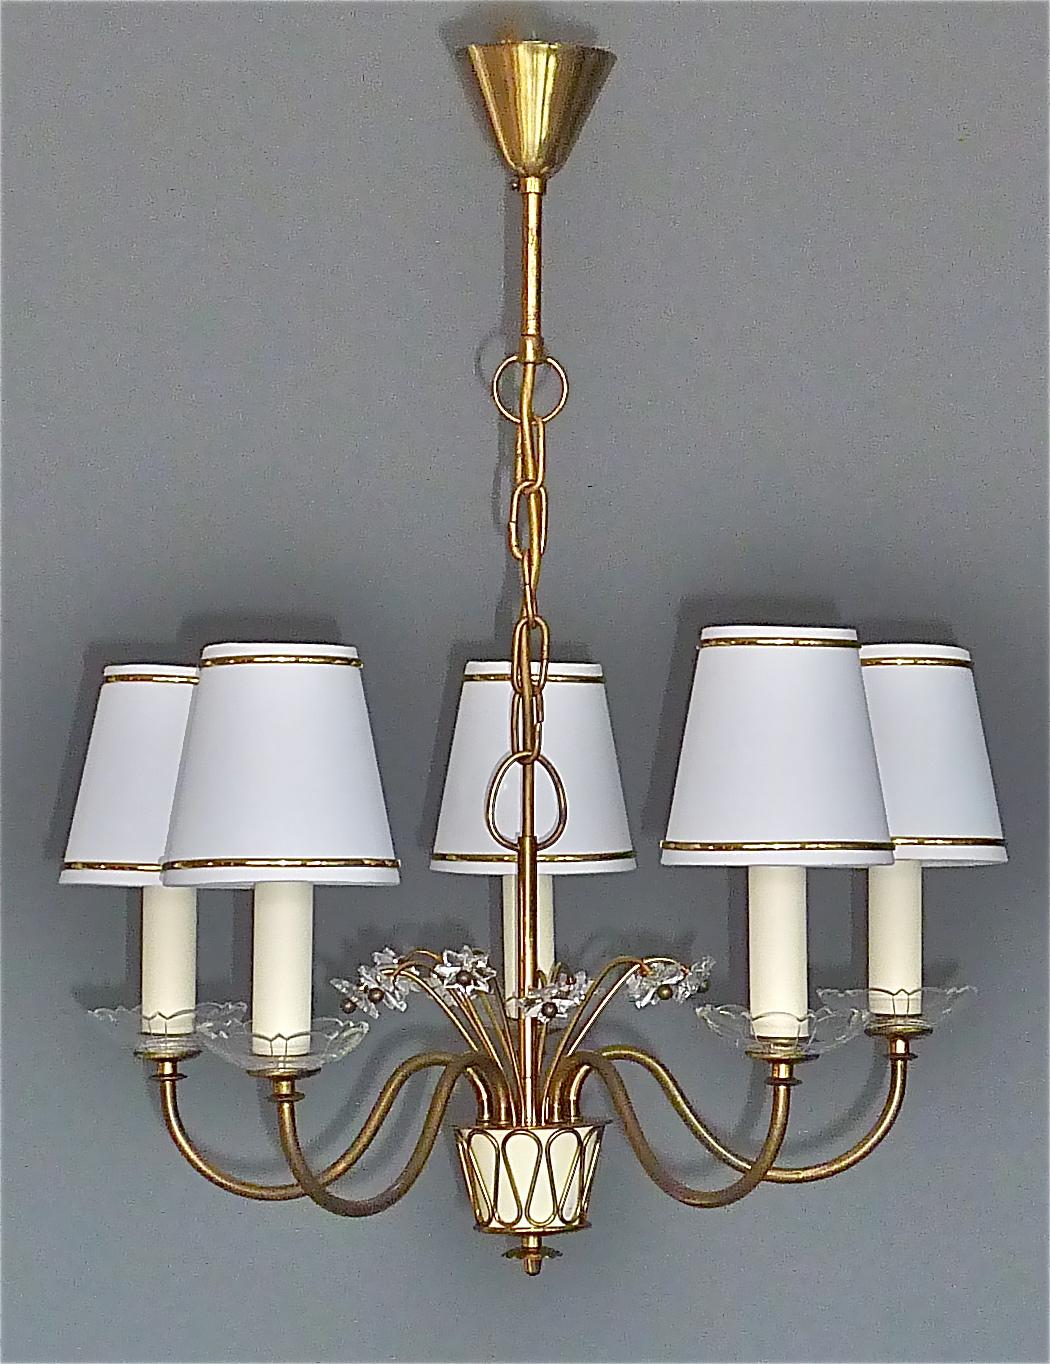 Gorgeous Josef Frank attribution midcentury chandelier most probably made by Svenskt Tenn, Austria or Sweden, early 1950s. The rare patinated brass chandelier has 5 scrolled arms with faceted crystal glass bobeches, a beautiful center with a